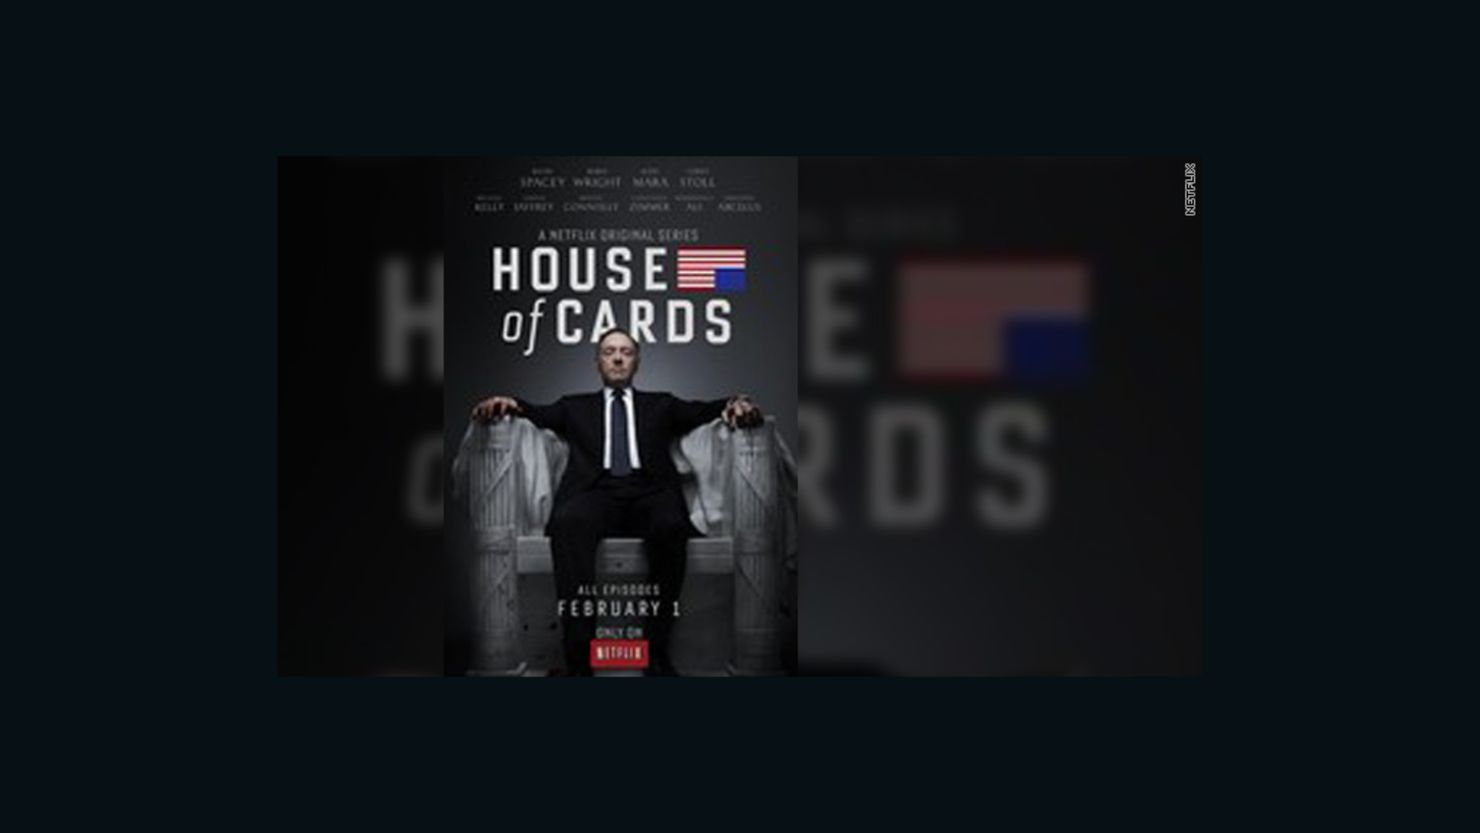 Netflix recently premiered the entire first season of  "House of Cards," a political thriller with Kevin Spacey.